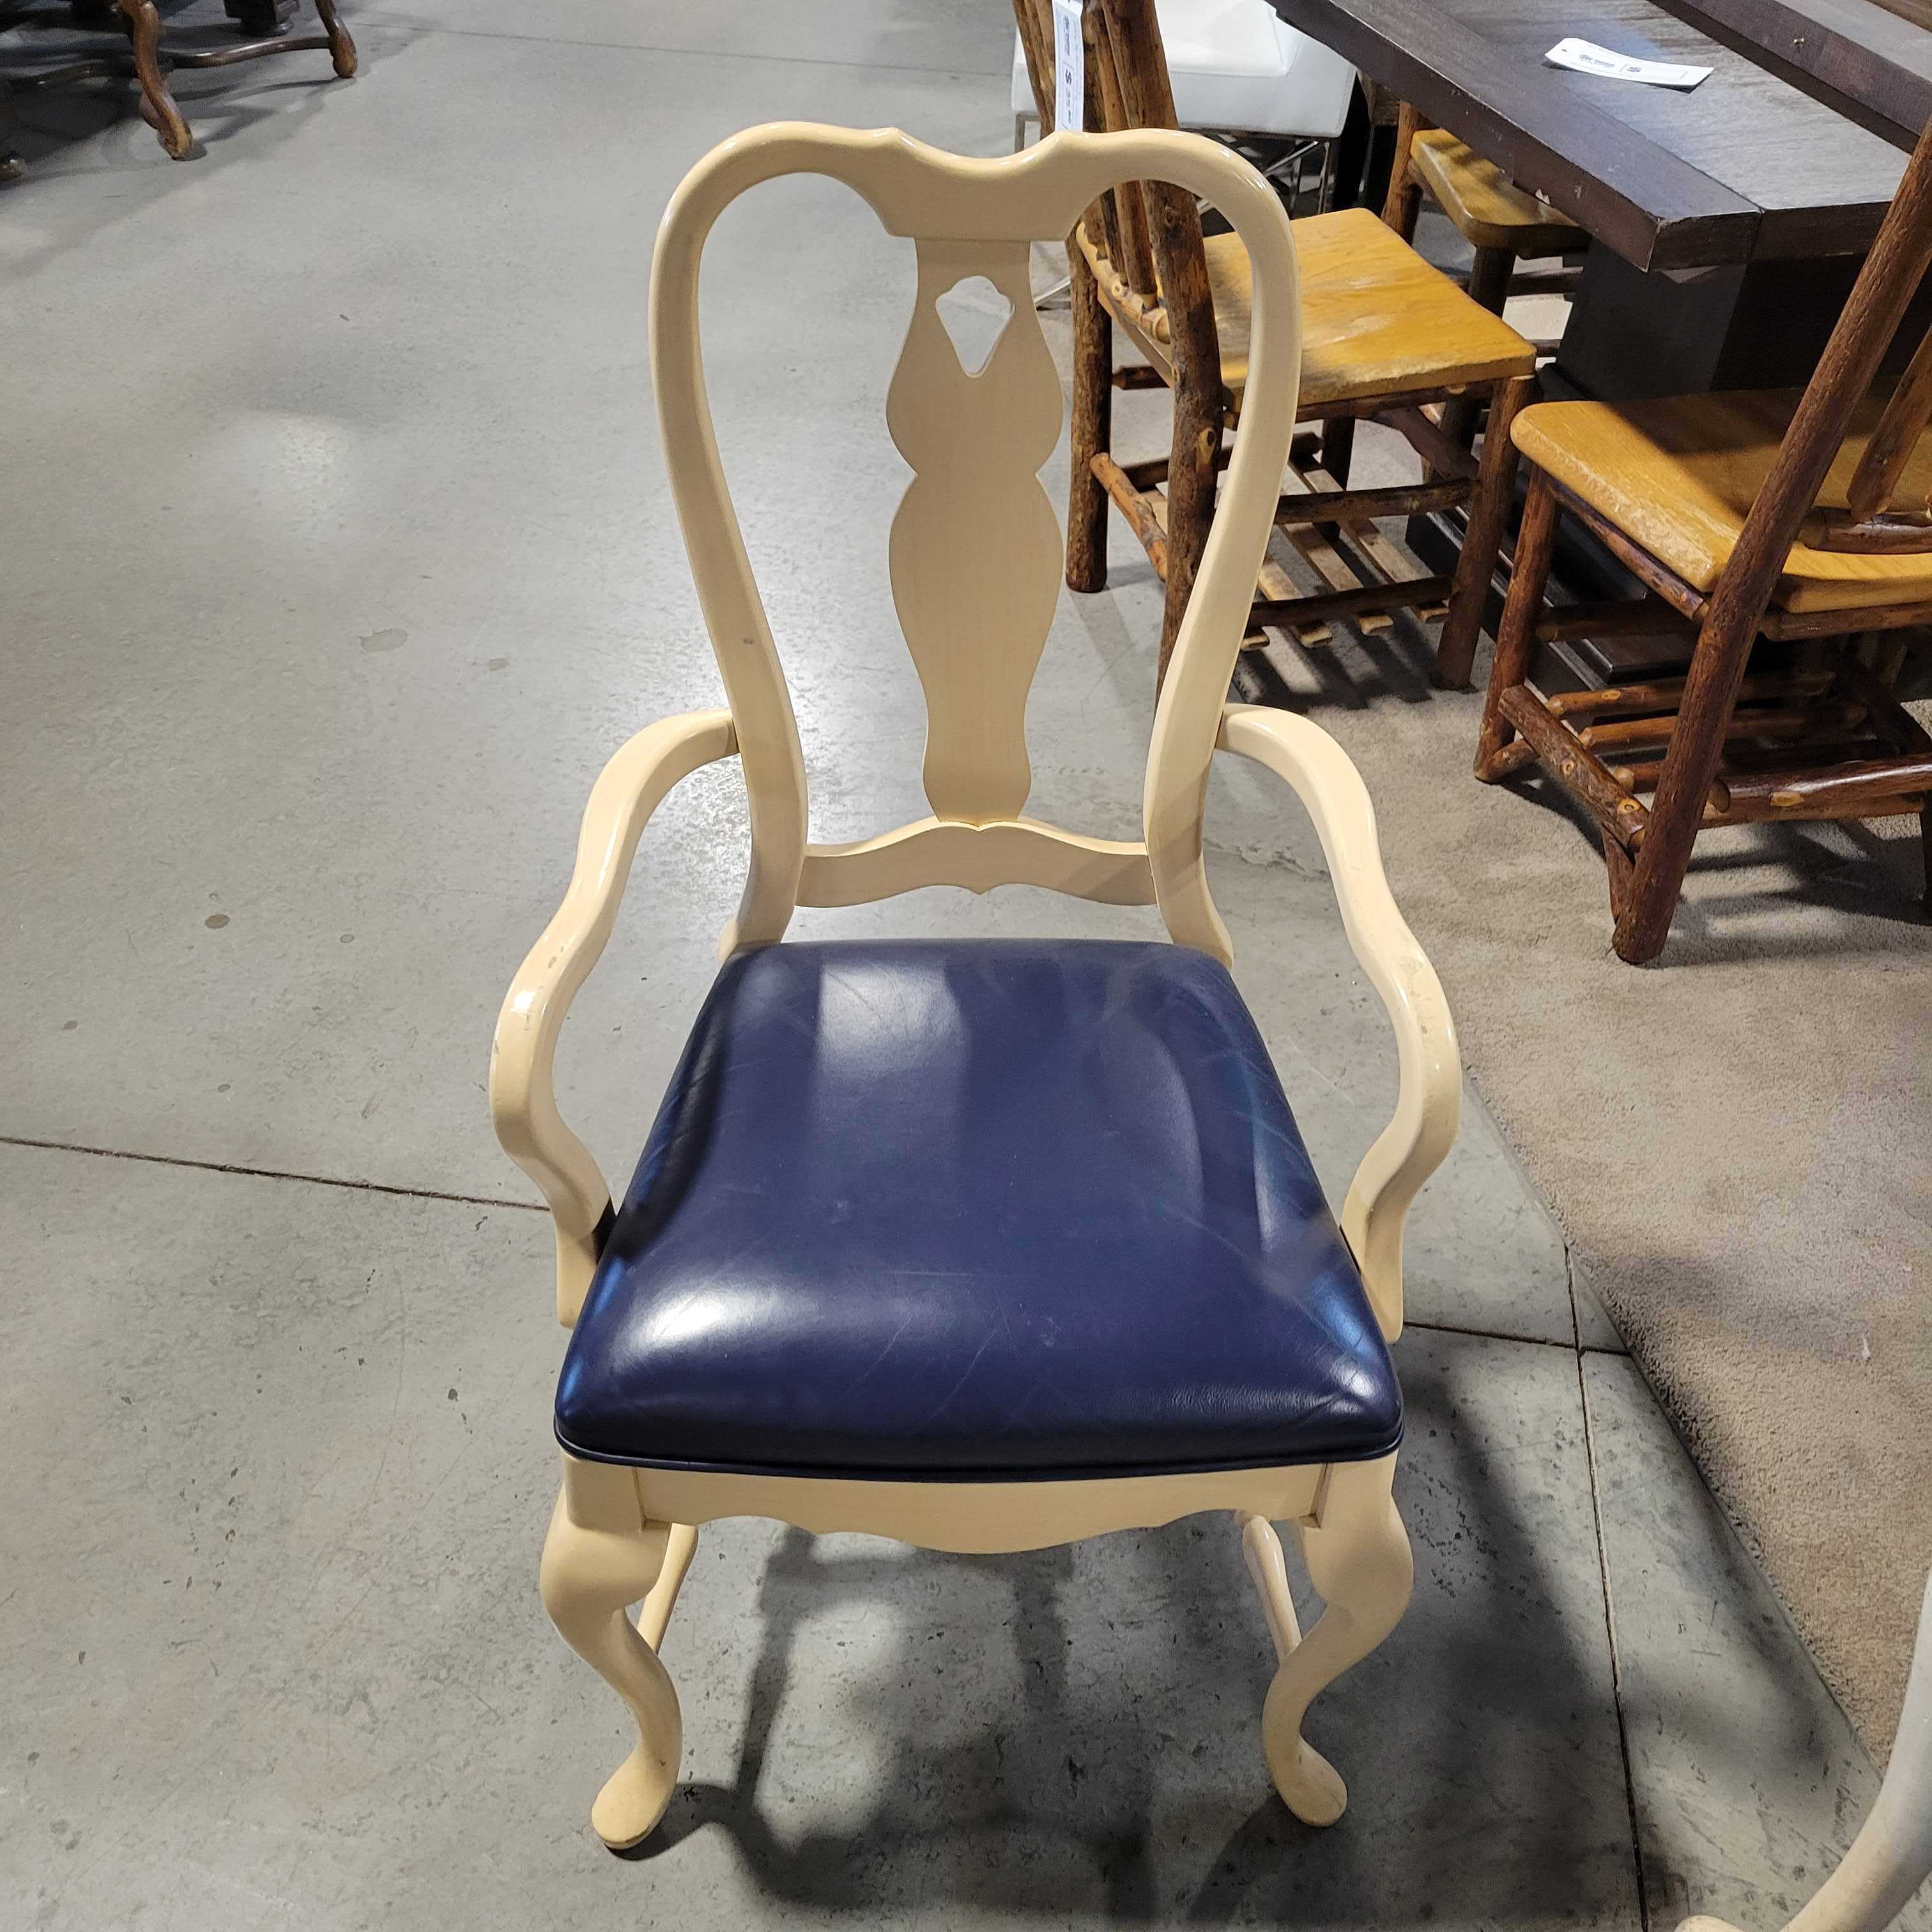 Blonde & Washed Wood 2 Leaves Table with 8 Navy Leather Seat Chairs Dining Set